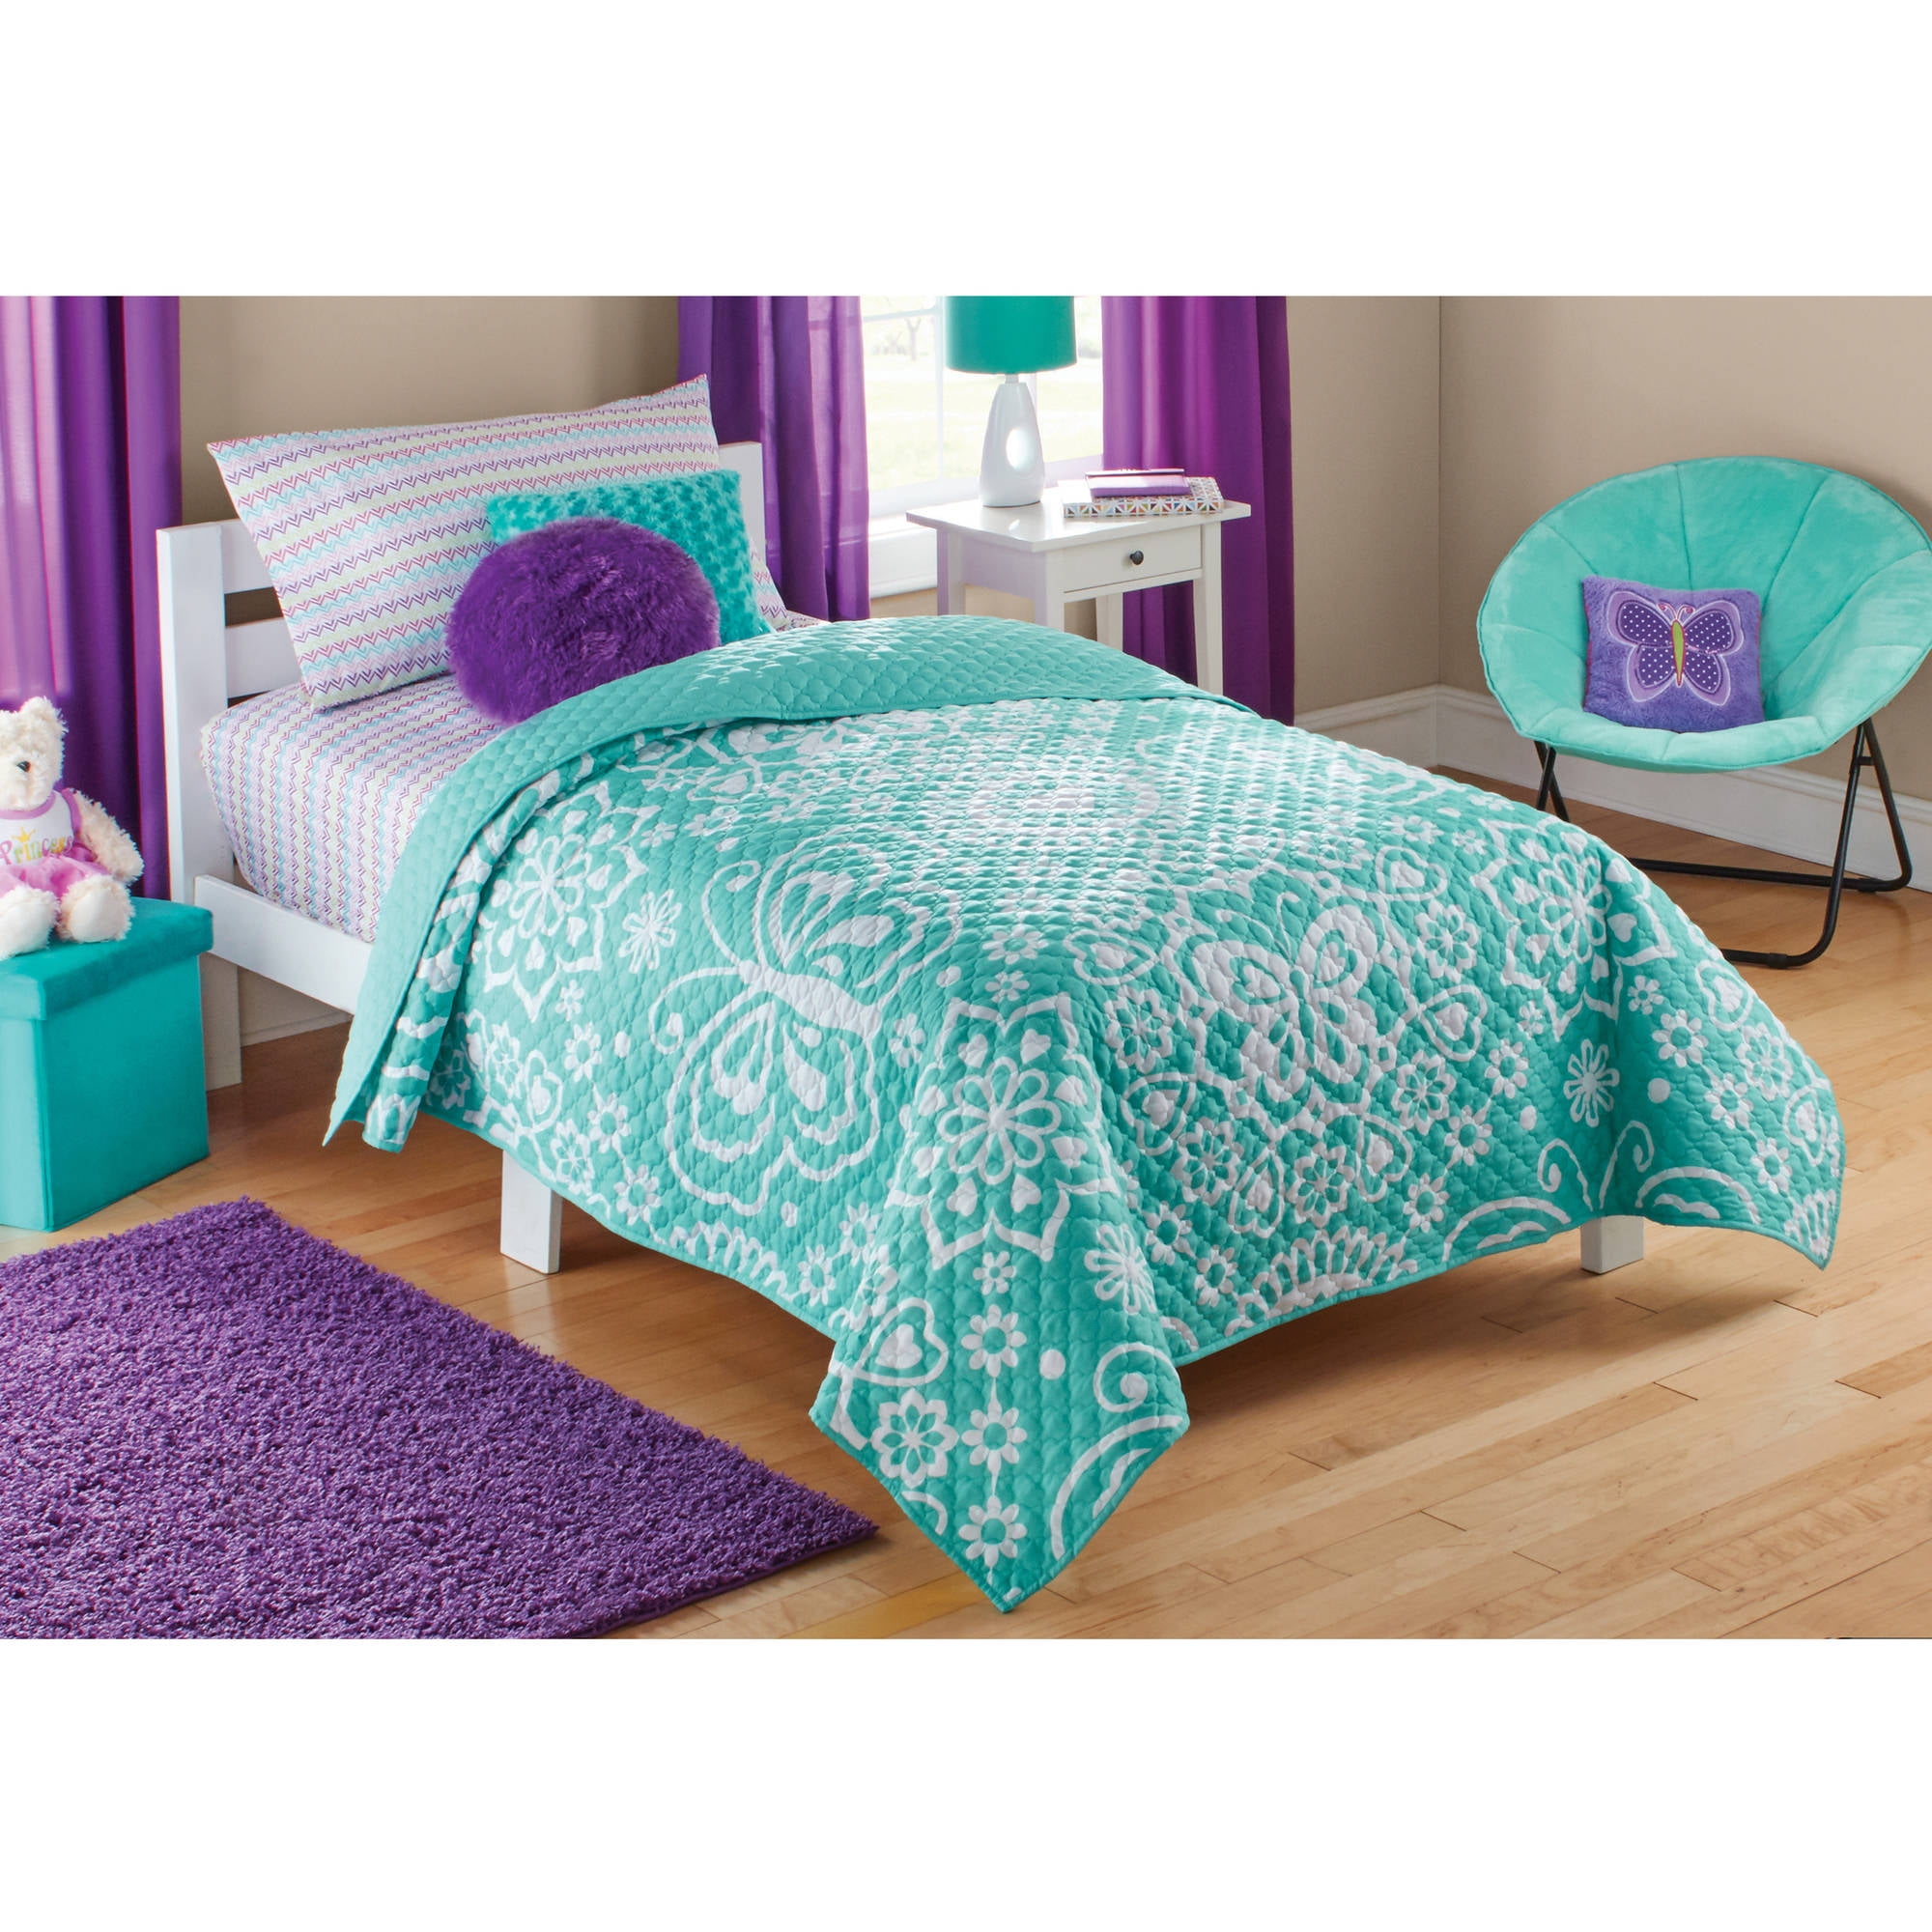 Mainstays Kids Purple Butterfly Coordinated Bed  in a Bag 